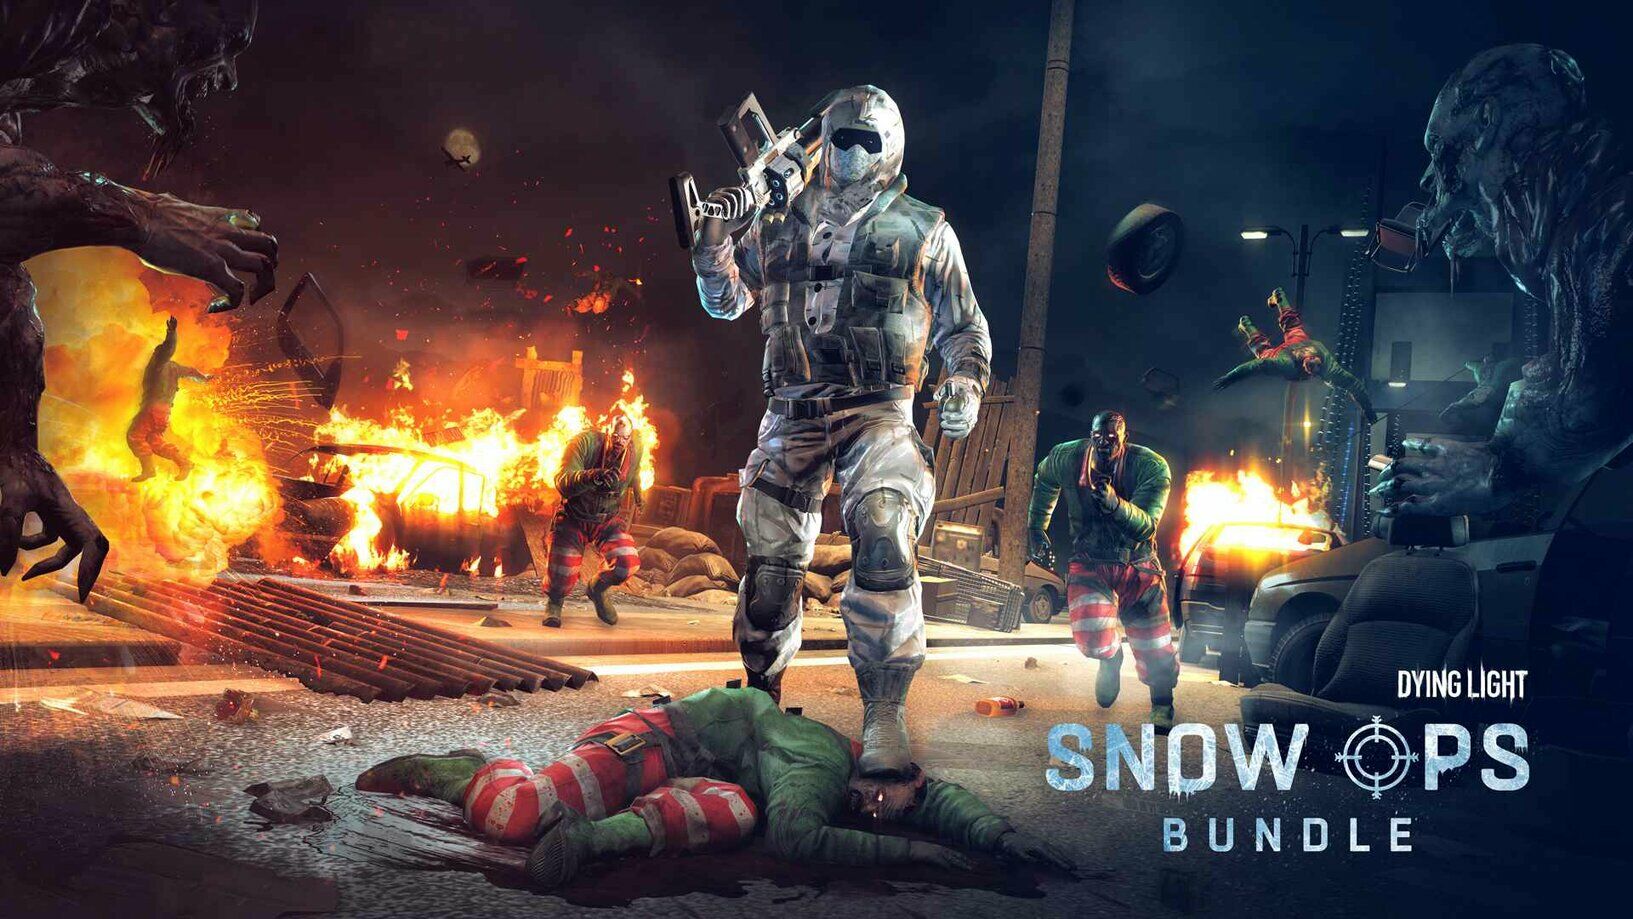 Dying Light Snow Ops Bundle PC